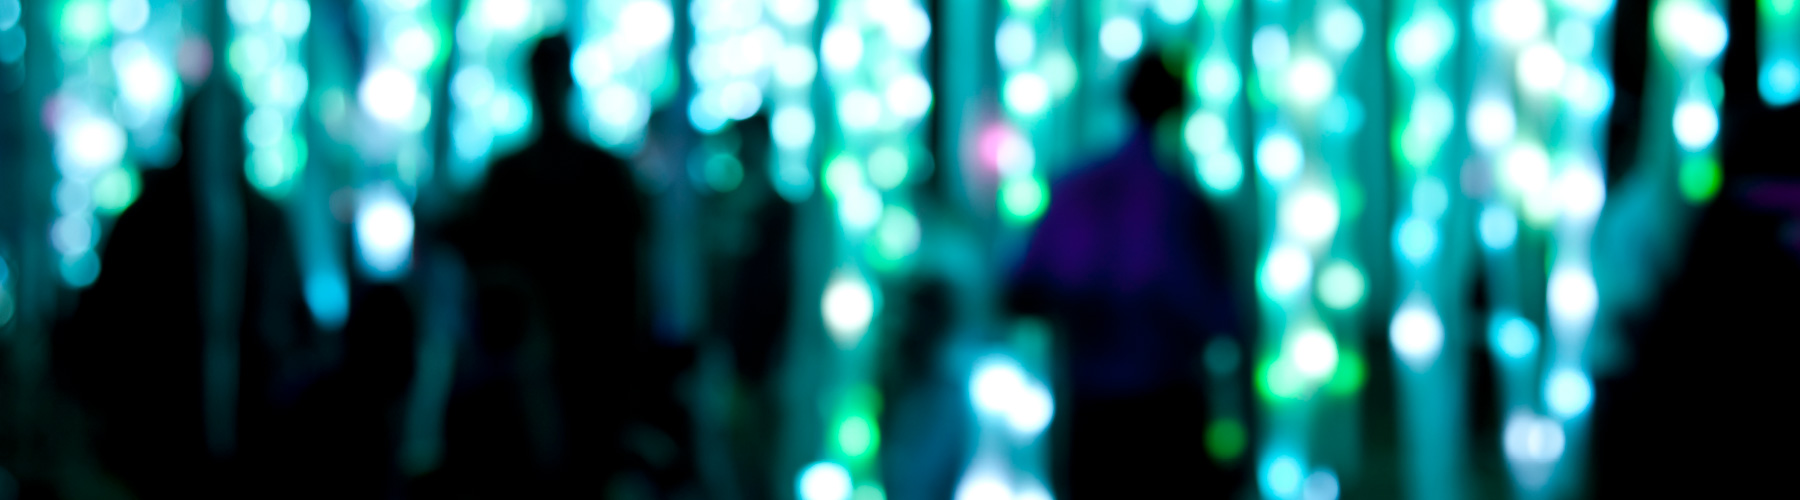 Blurred people standing in front of wall with lights